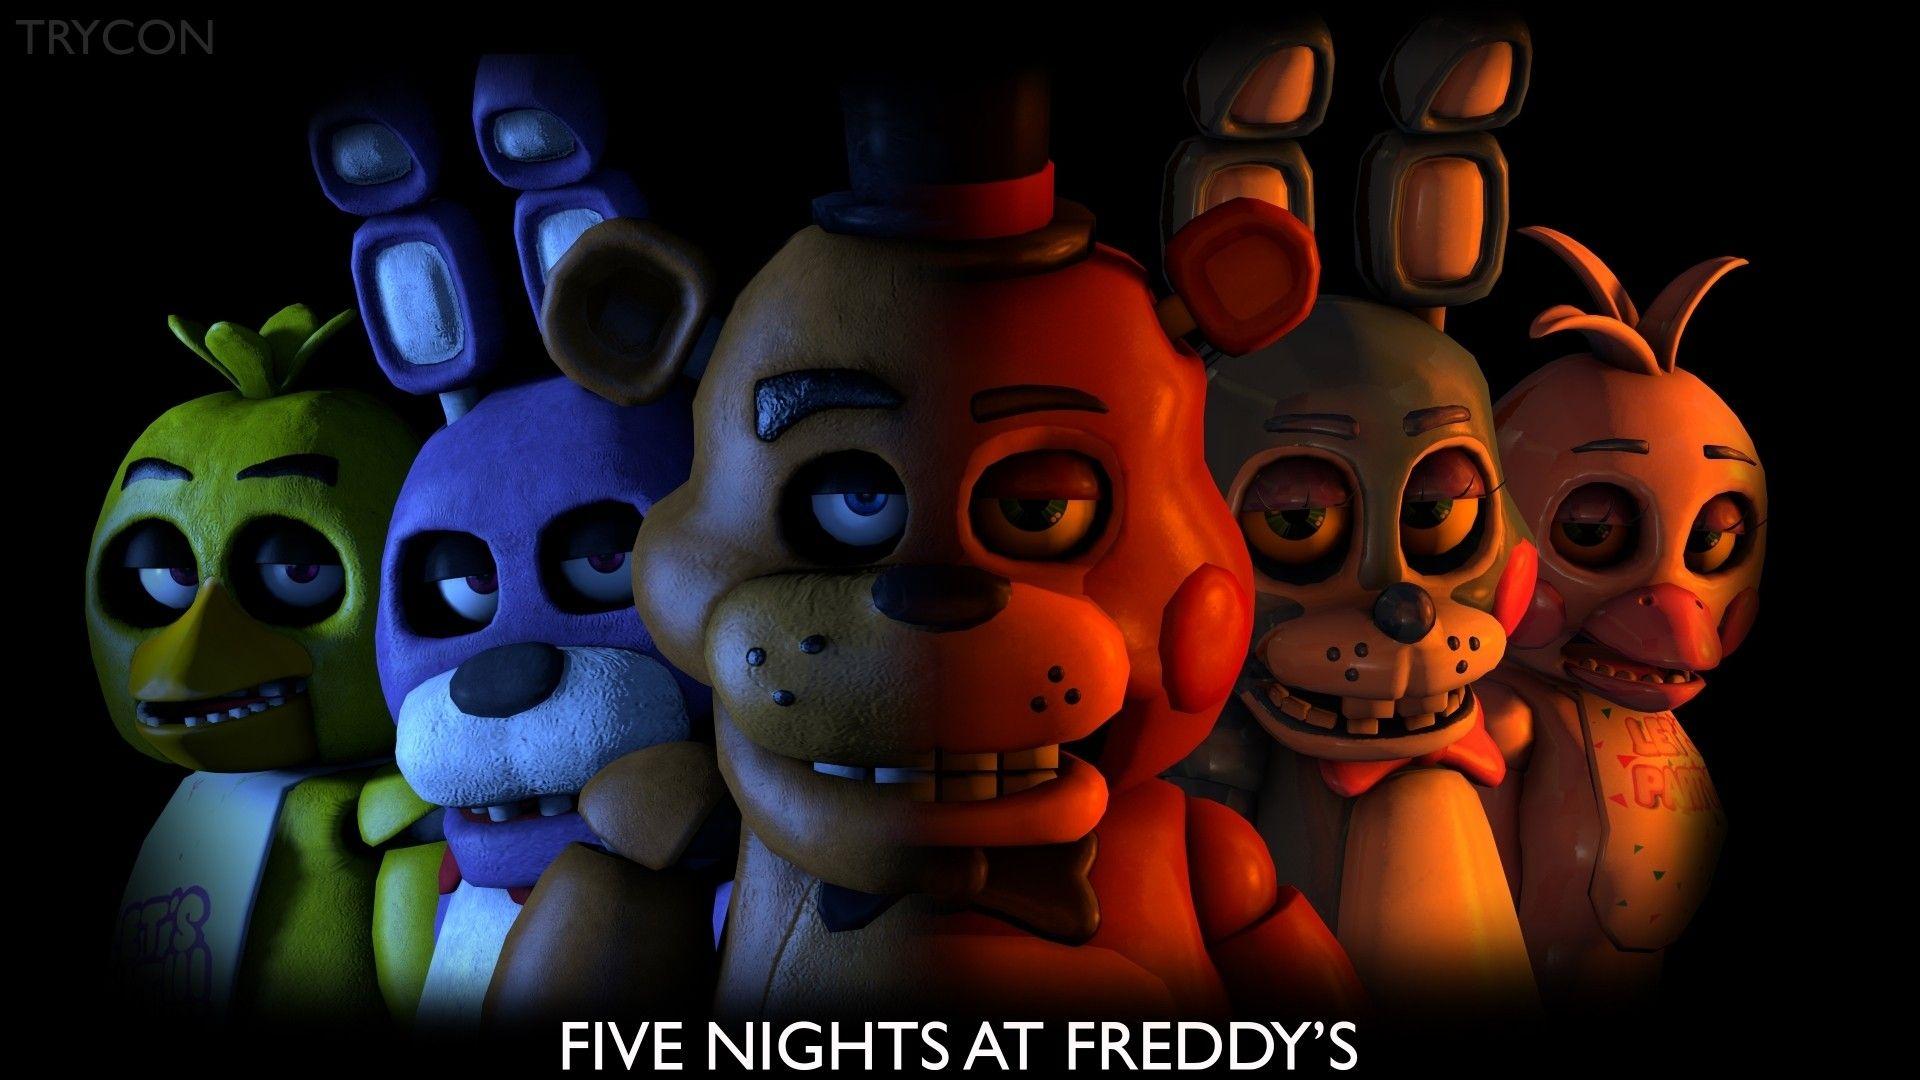 Five Nights At Freddy's wallpaperDownload free